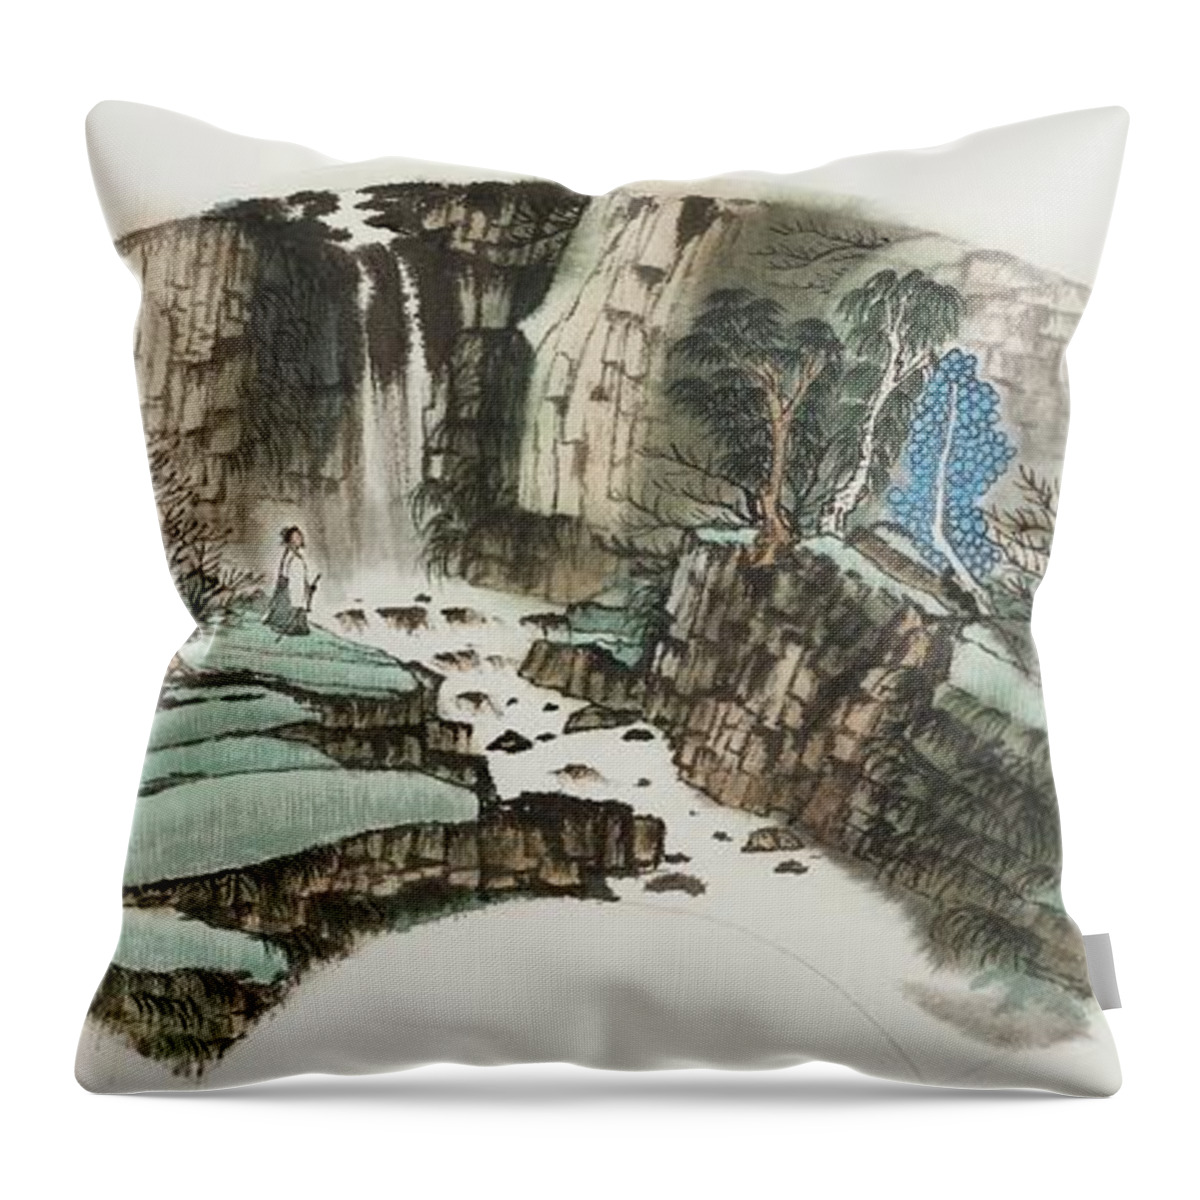 Chinese Watercolor Throw Pillow featuring the painting Waterfall Hike by Jenny Sanders